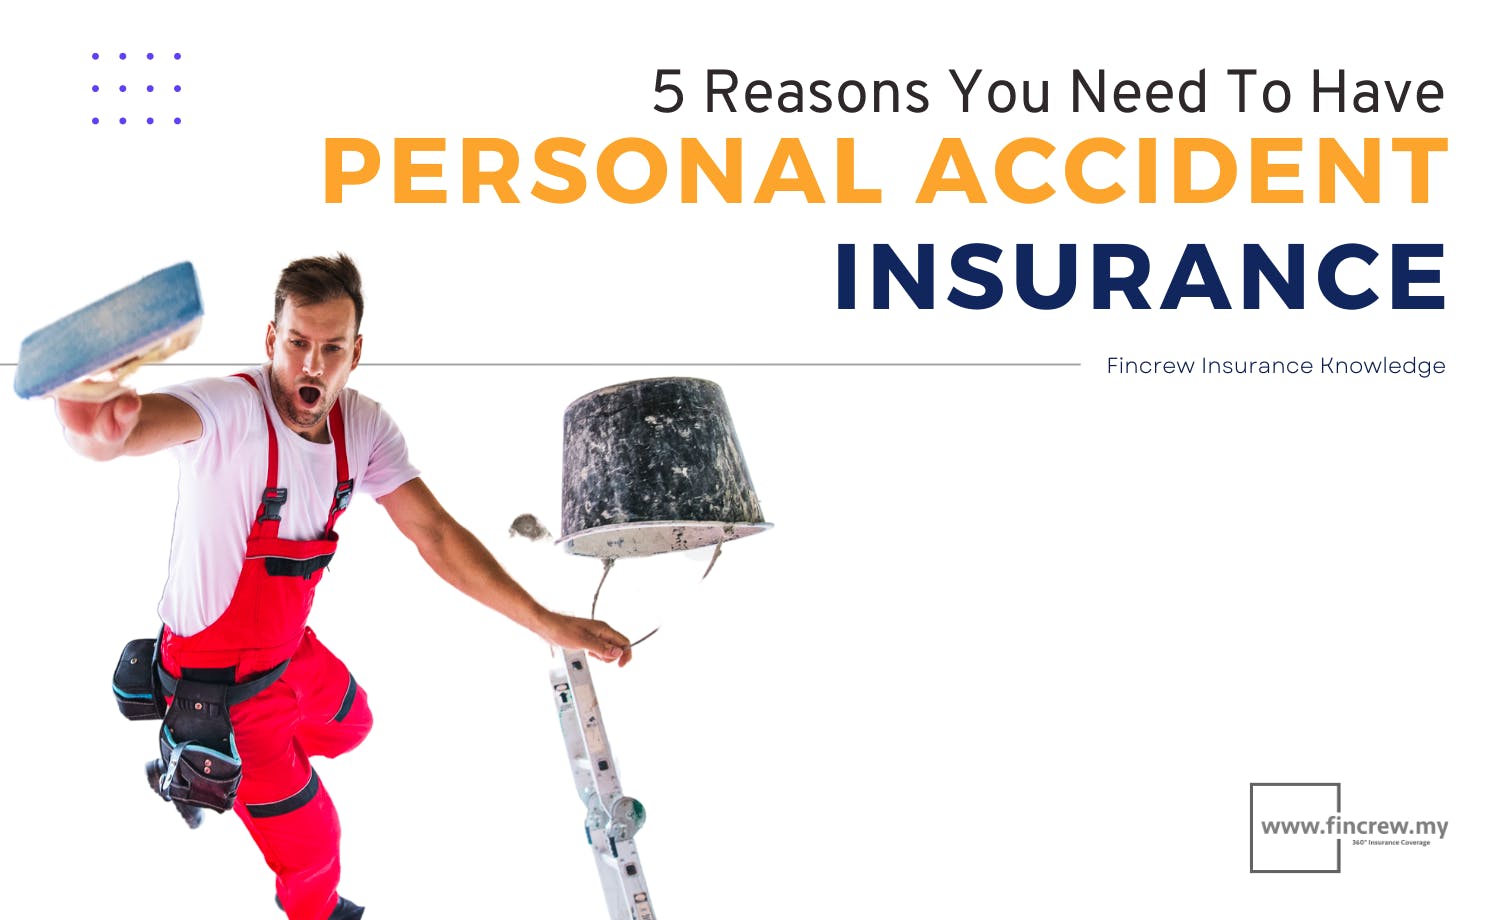 Reasons You Need To Have Personal Accident Insurance